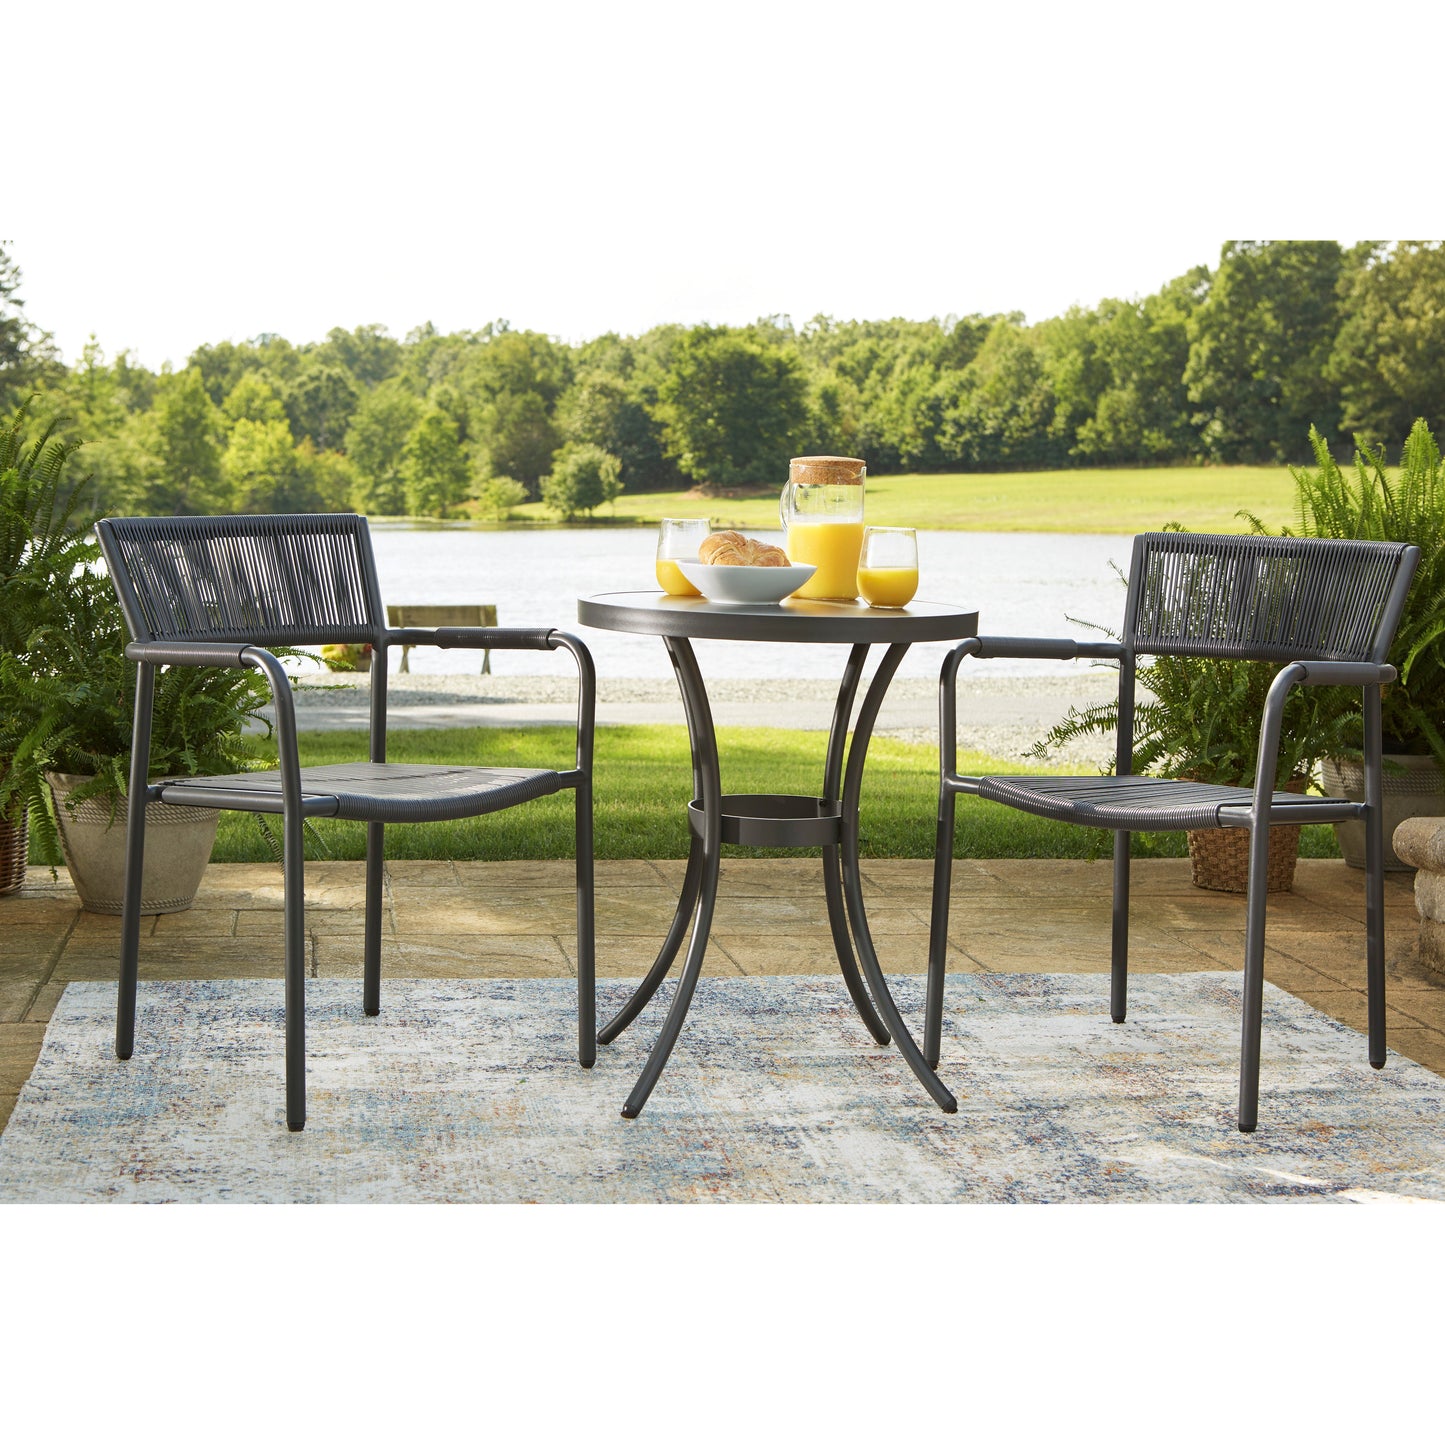 CRYSTAL BREEZE 3-PIECE TABLE AND CHAIR SET